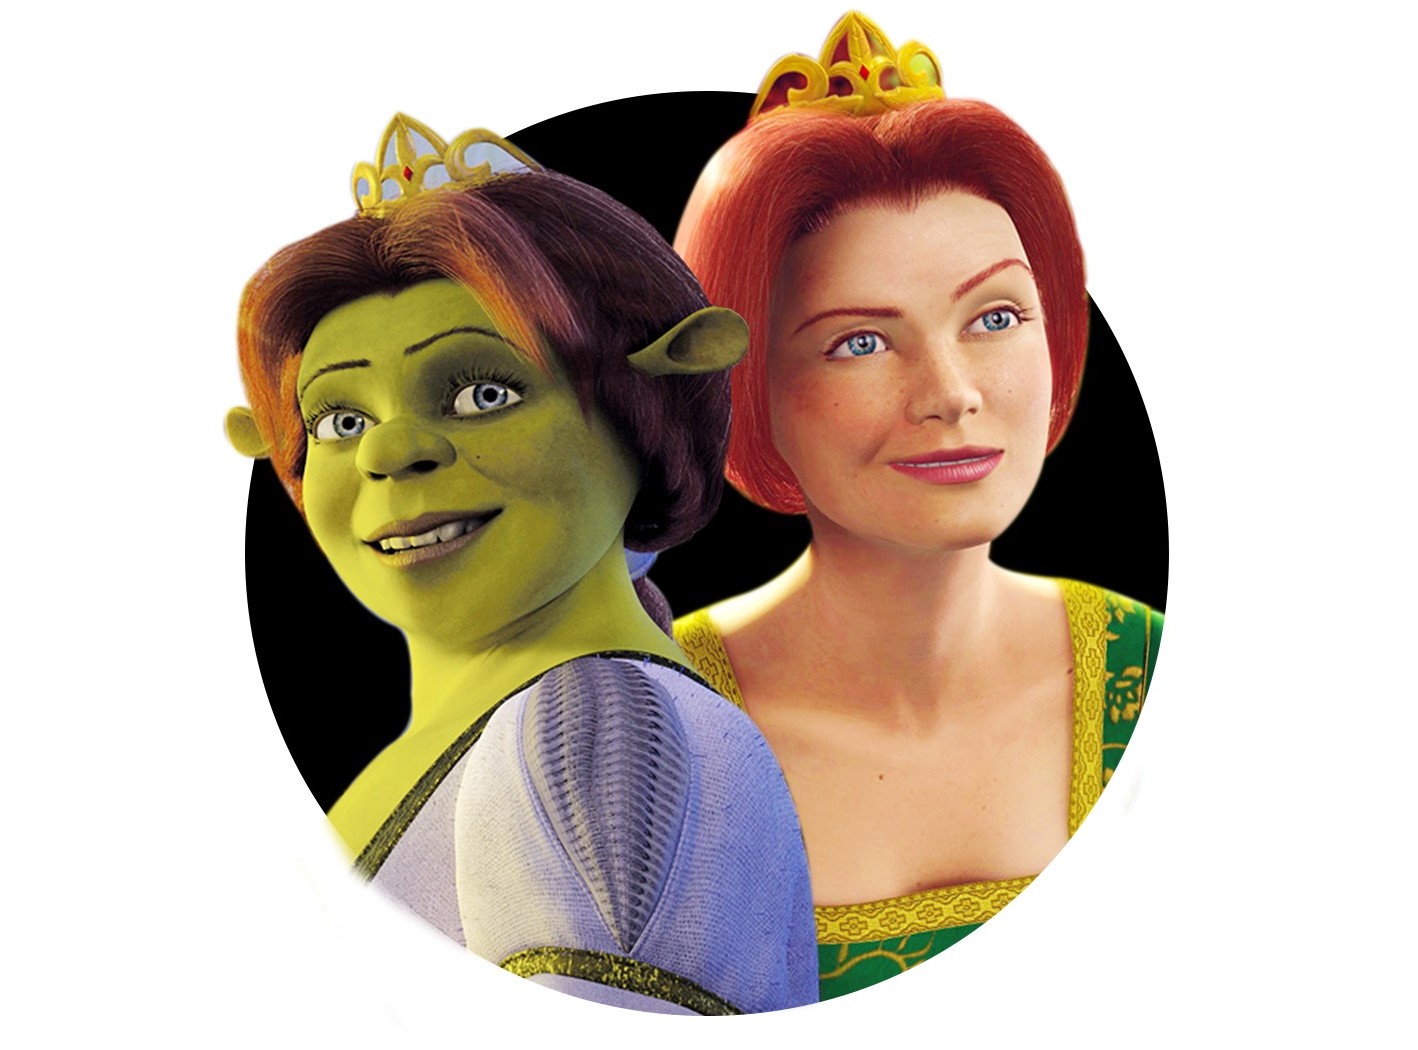 alex advani add photo pictures of fiona from shrek